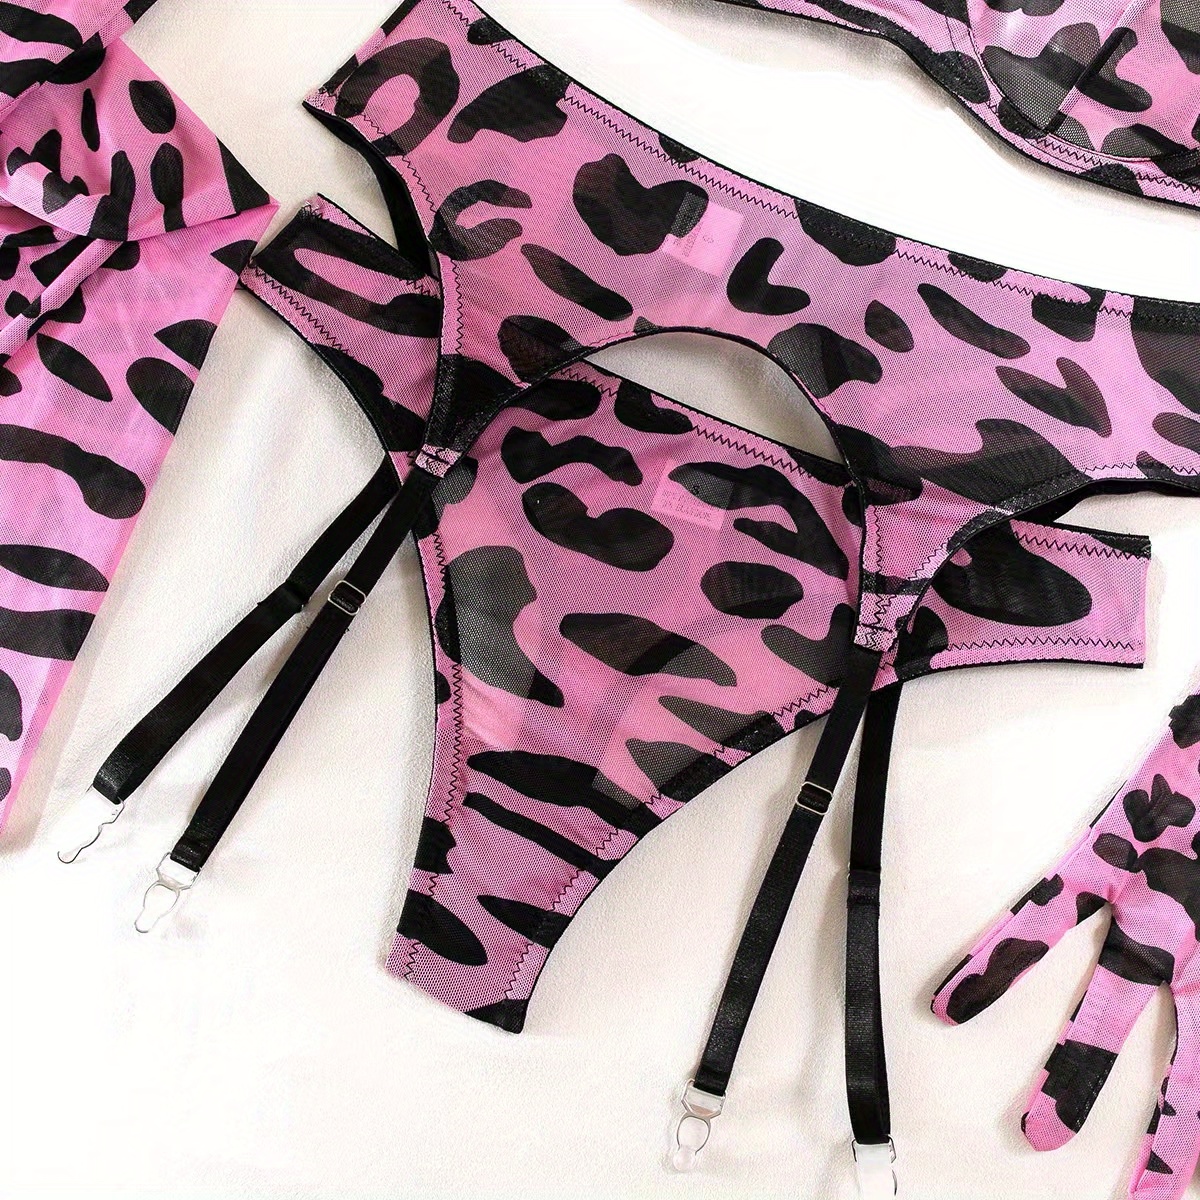 Miorre Leopard Push-up Bra and Panty Set (75B) price in UAE